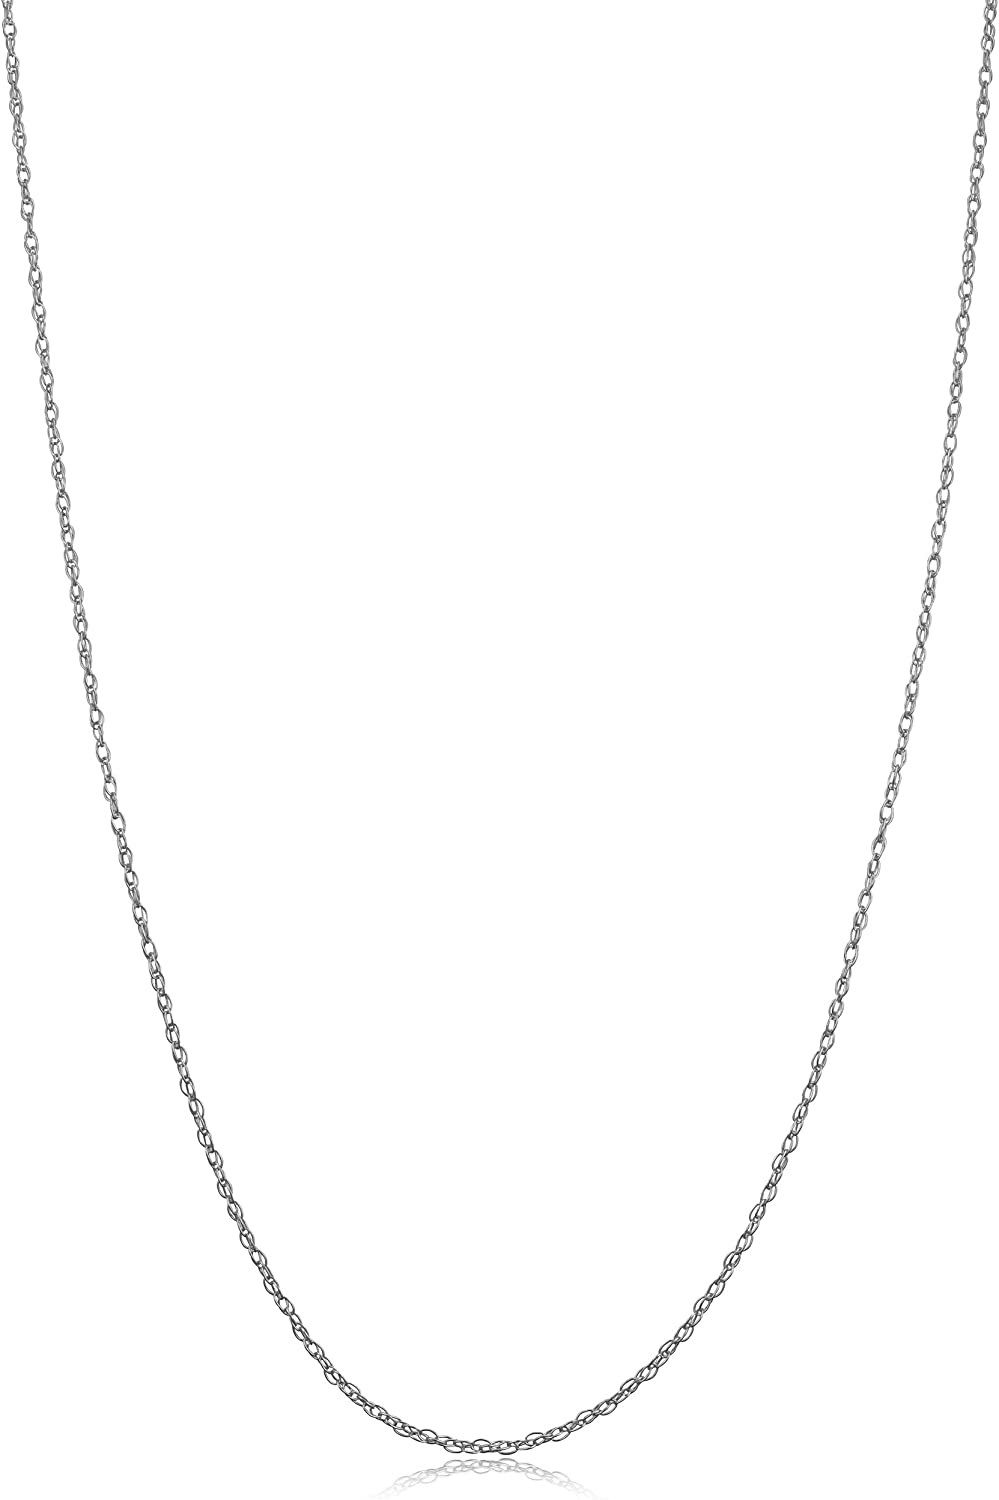 14k White Gold Rope Chain Barely-There Necklace For Women (0.7 mm, 0.9 mm, 1 mm or 1.3 mm) - Thin And Lightweight